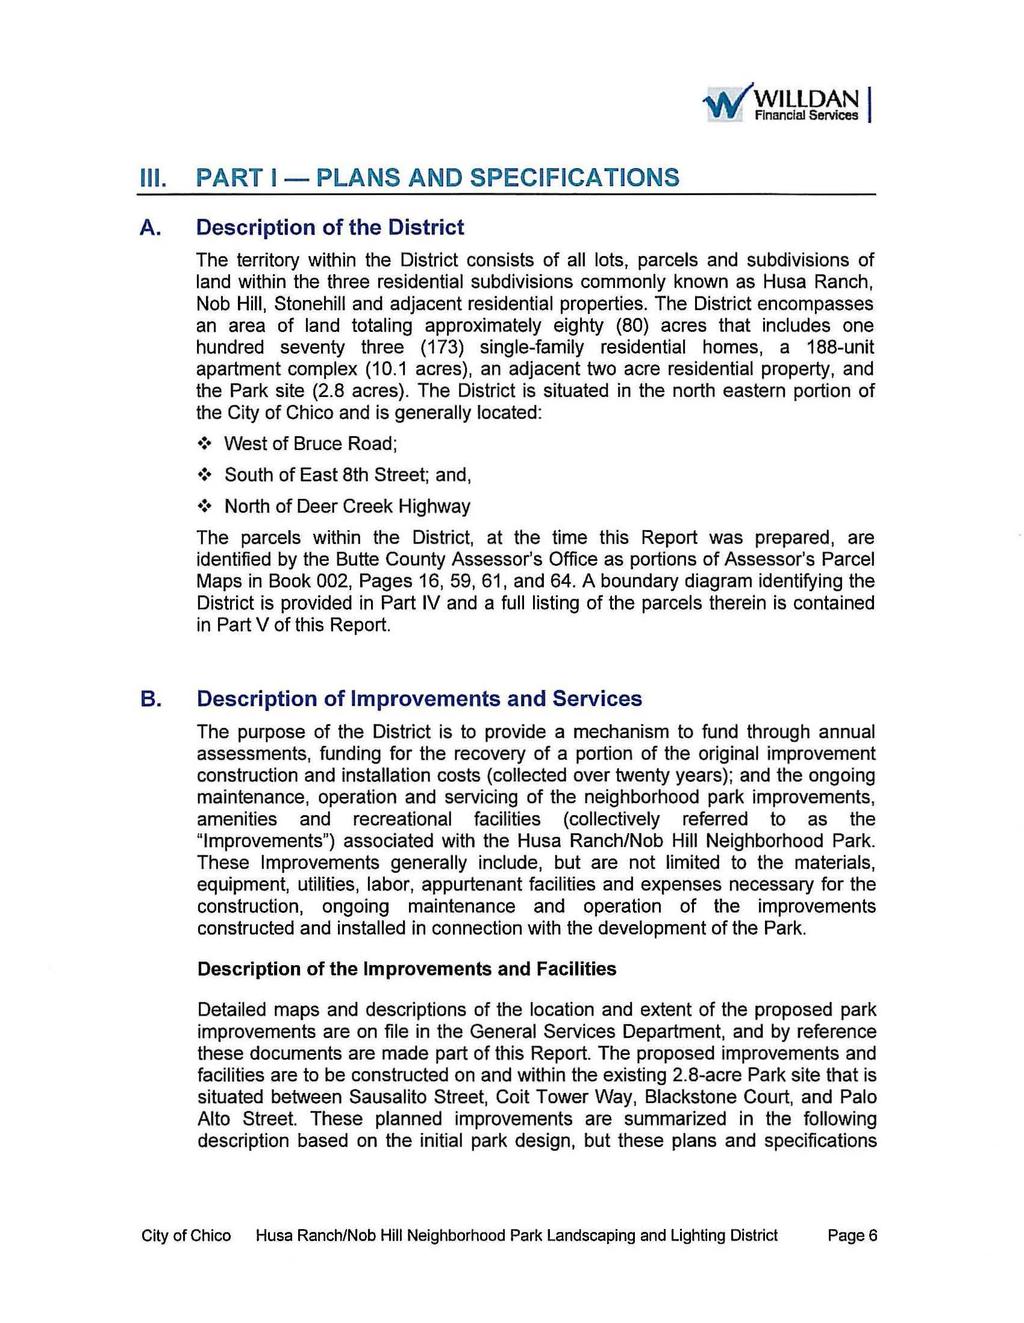 Ill. PART I - PLANS AND SPECIFICATIONS A.